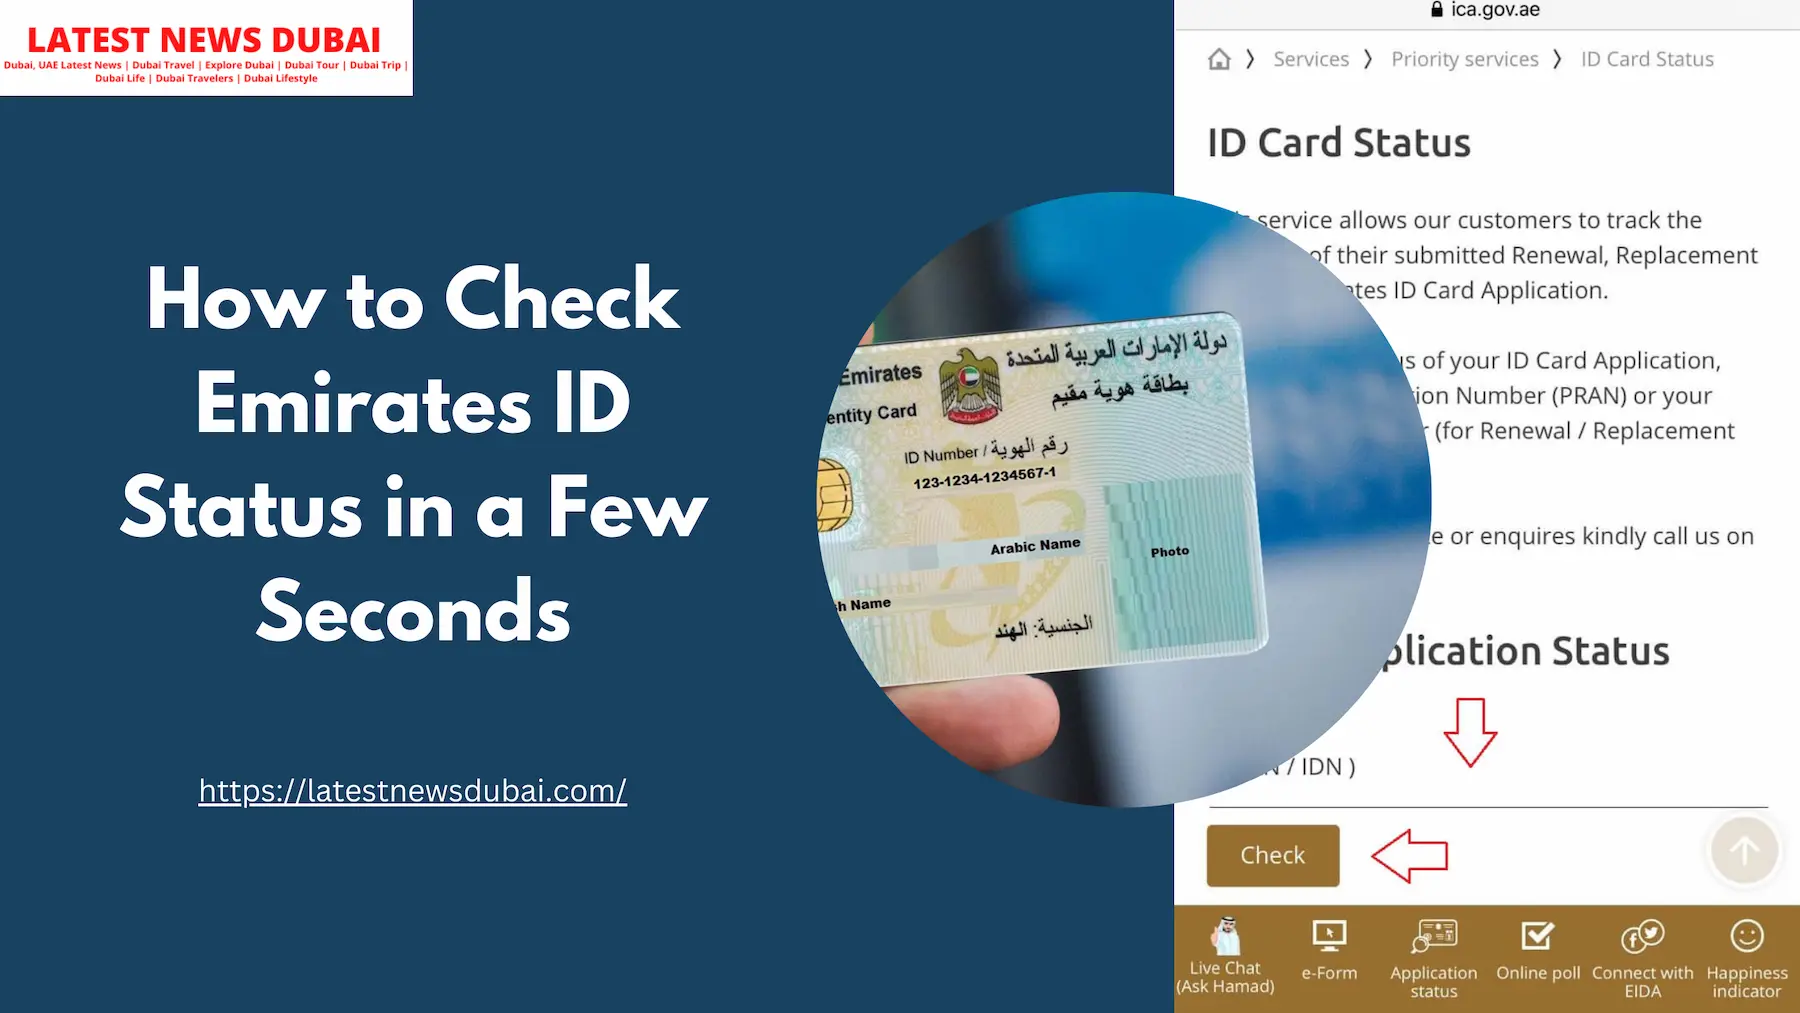 How to Check Emirates ID Status in a Few Seconds